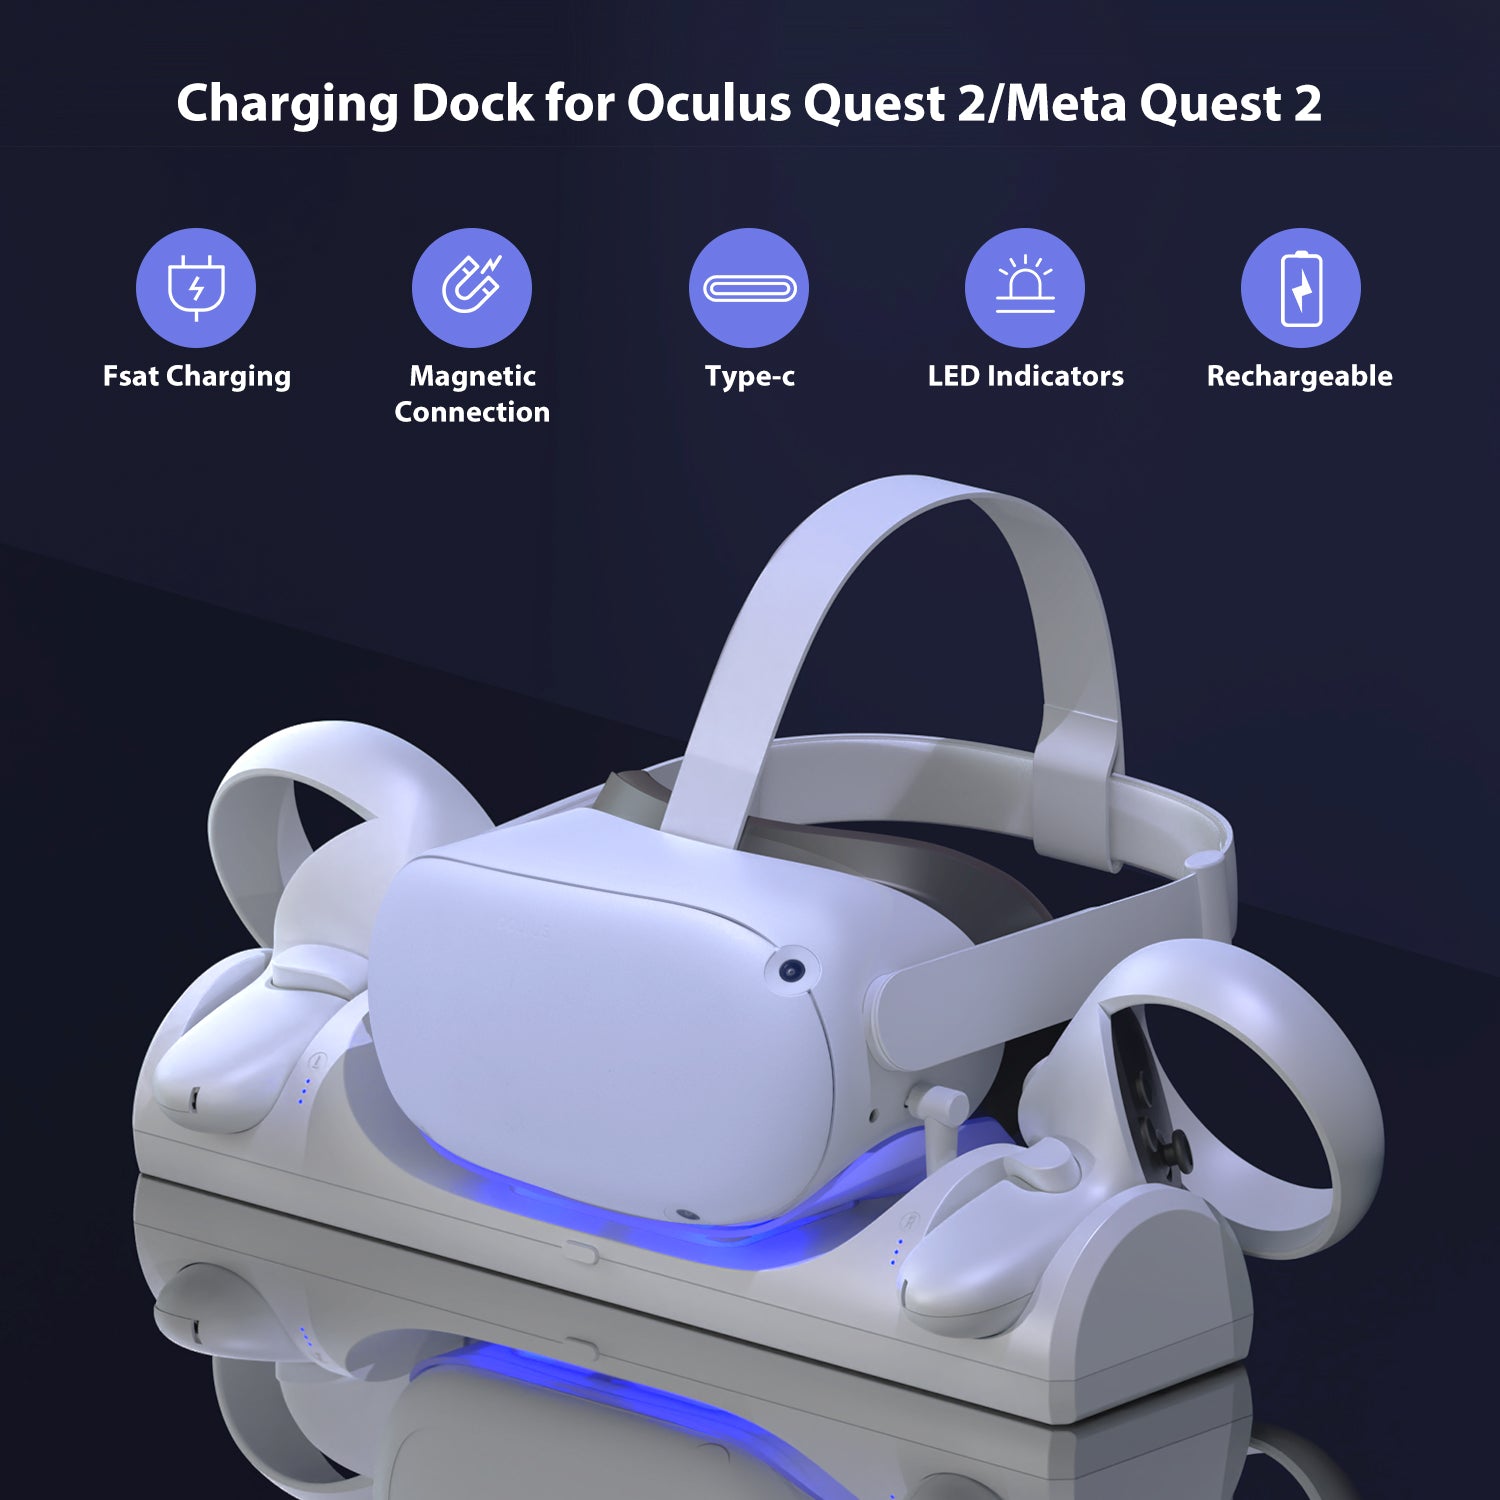 VR Charging Station for Oculus Quest 2/Meta Quest 2